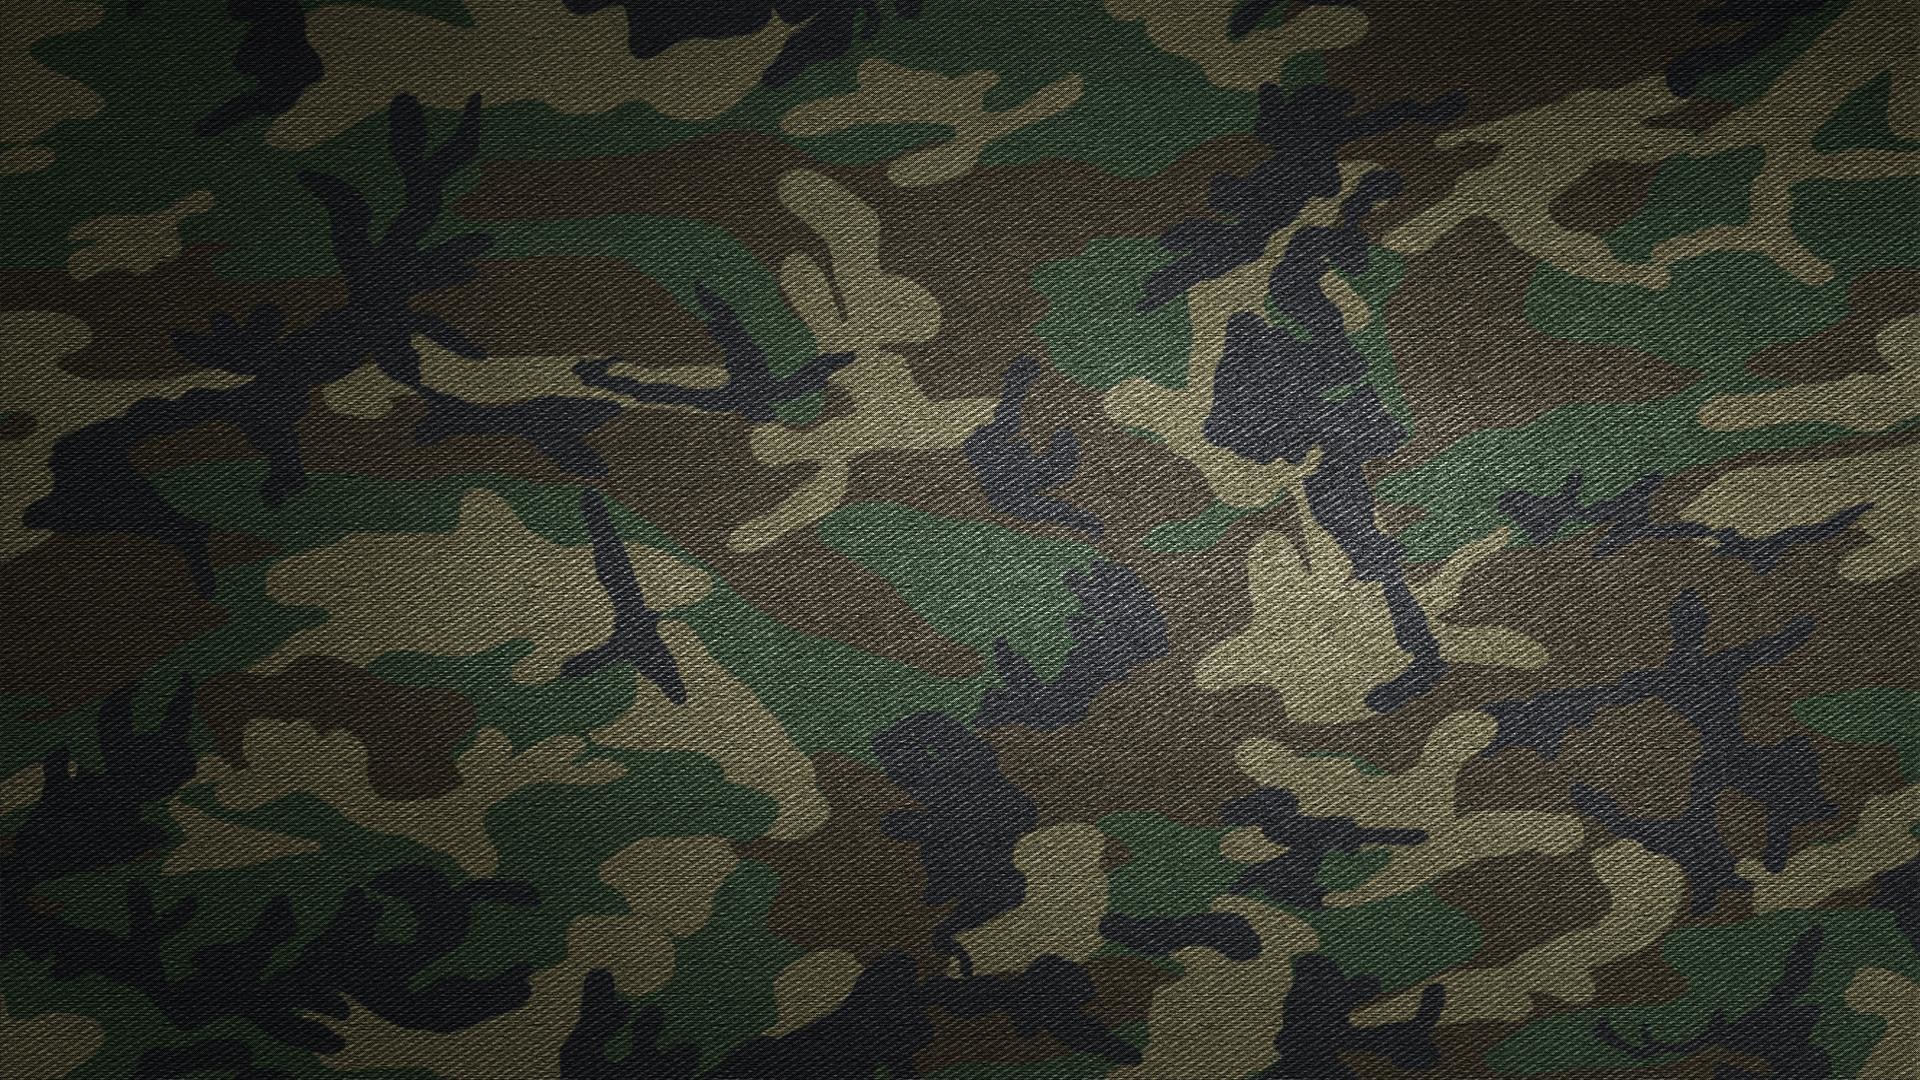 camo wallpaper for walls,military camouflage,camouflage,pattern,uniform,green